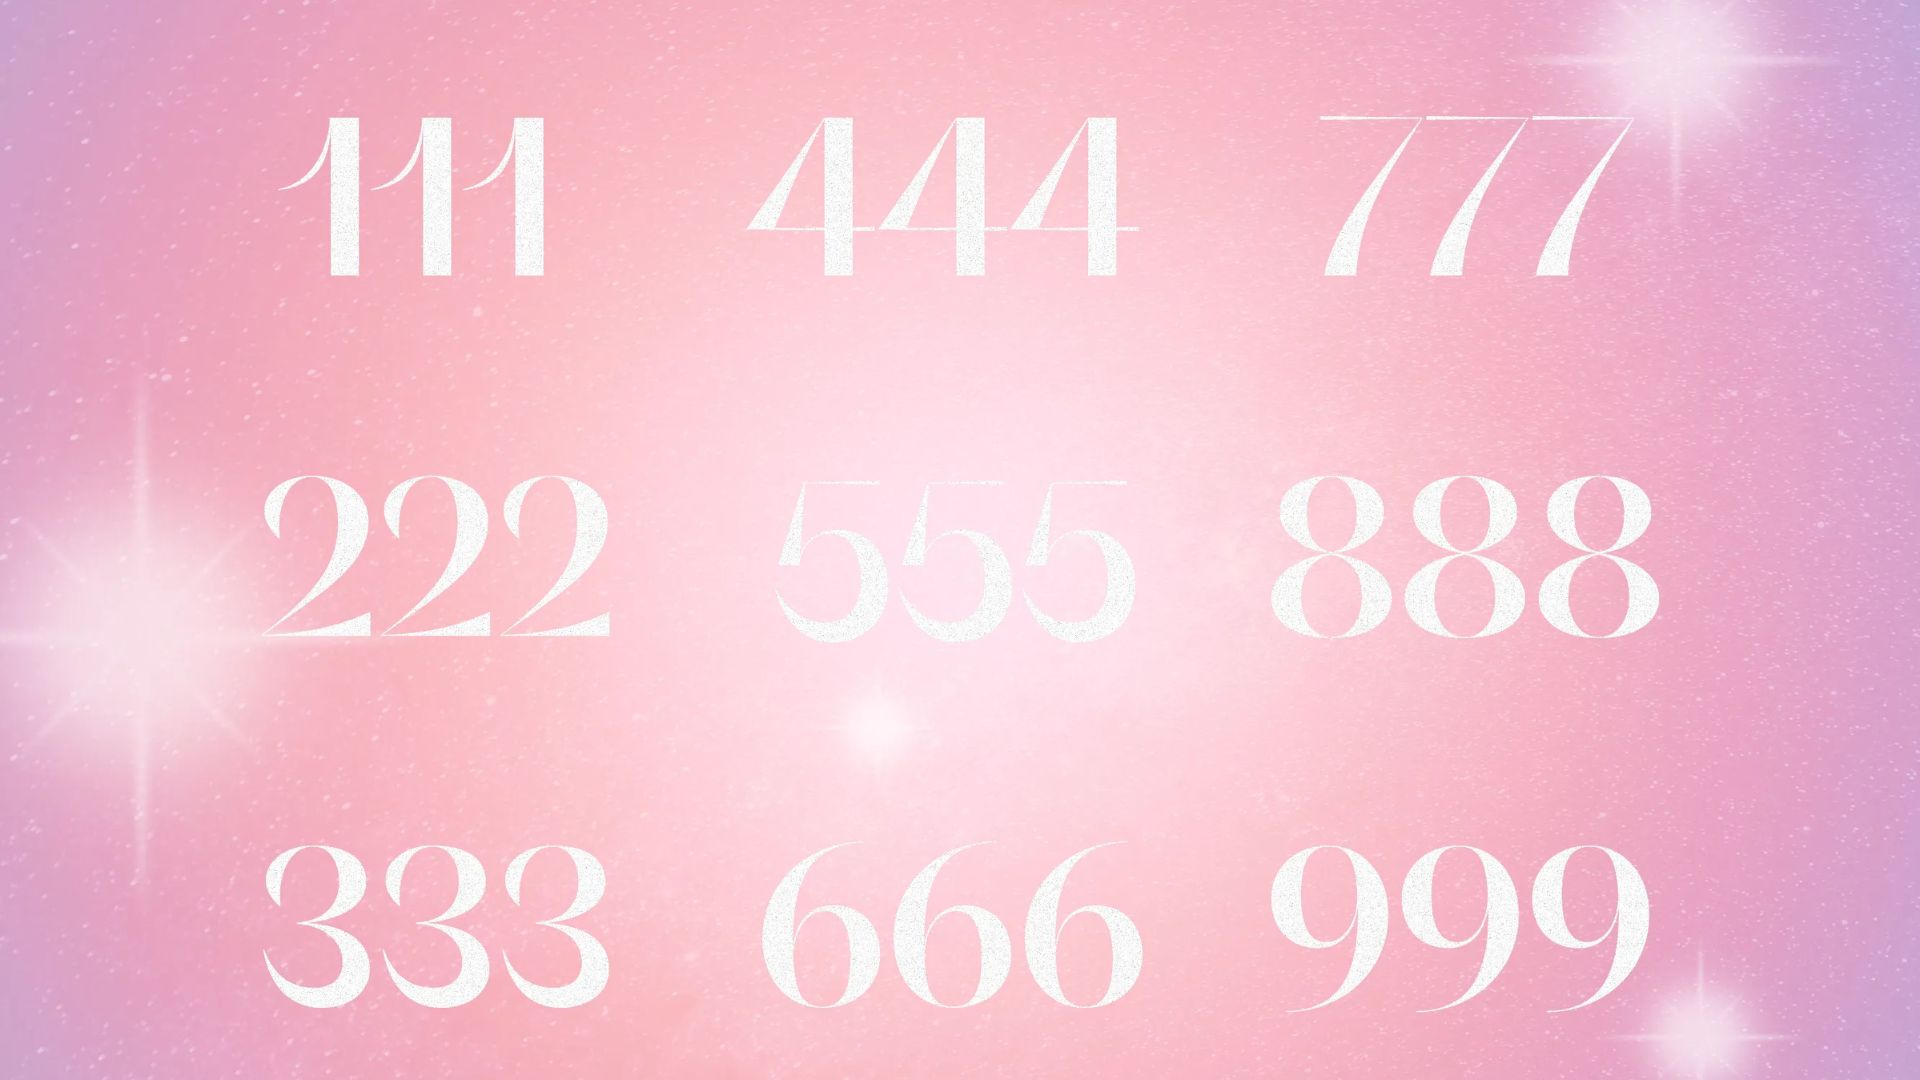 Repeating Digits